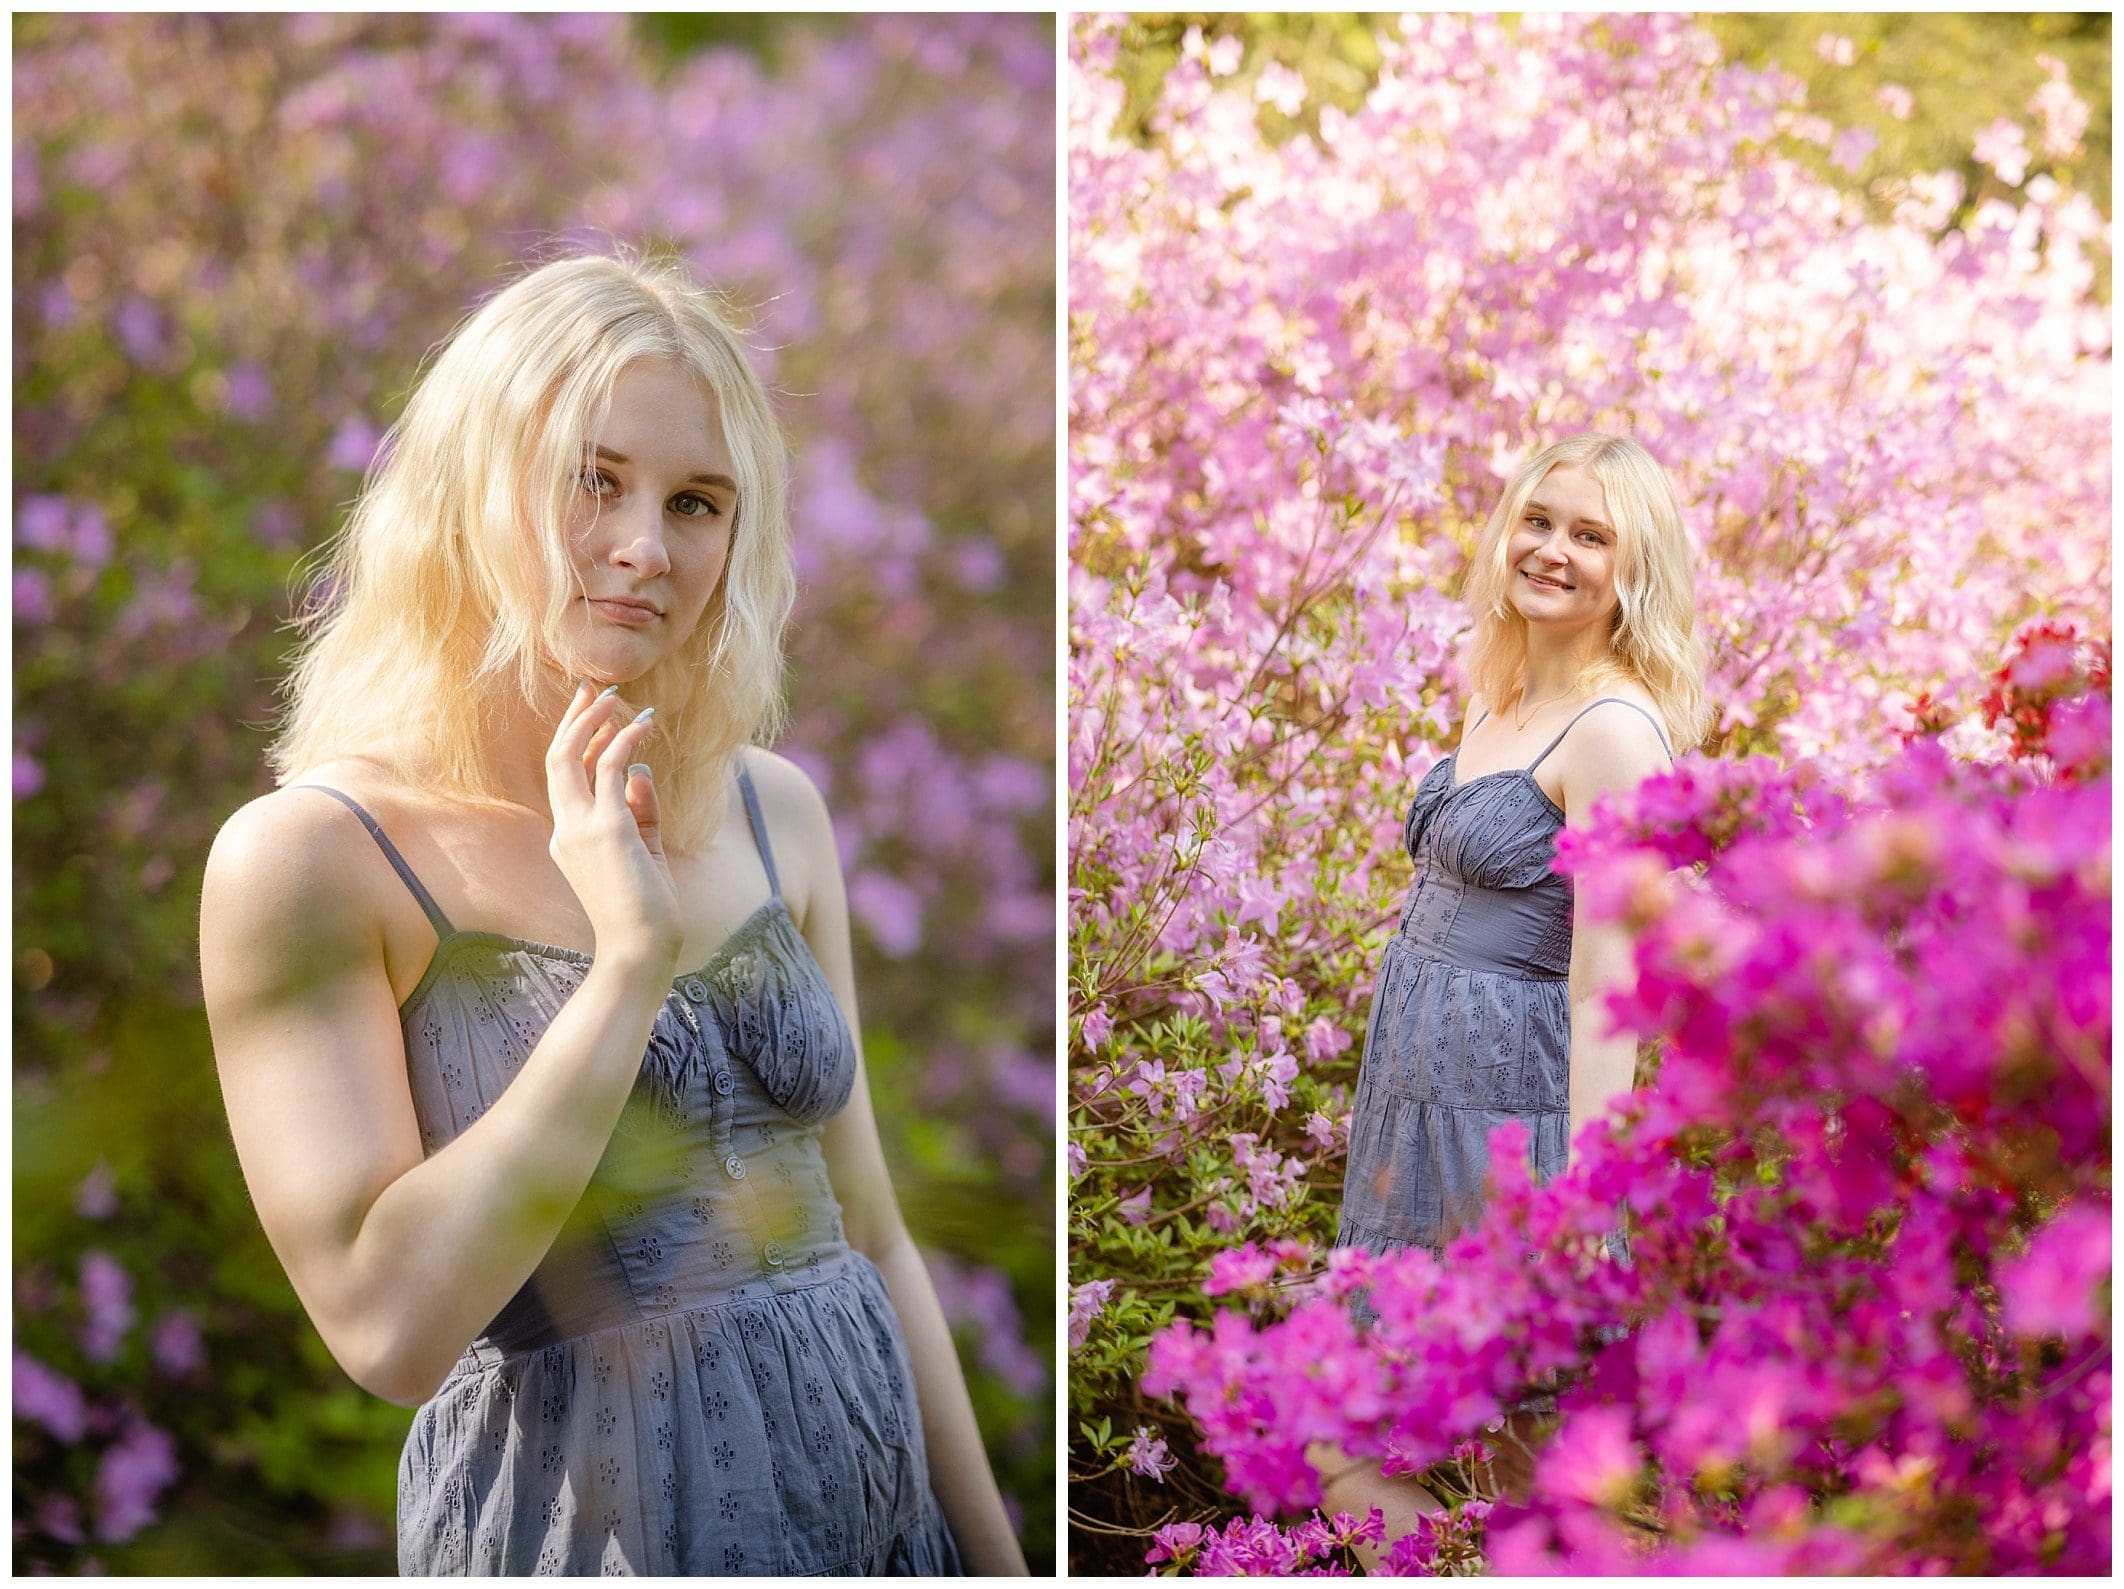 Senior photography in the Biltmore Estate gardens by Kathy Beaver Photography.